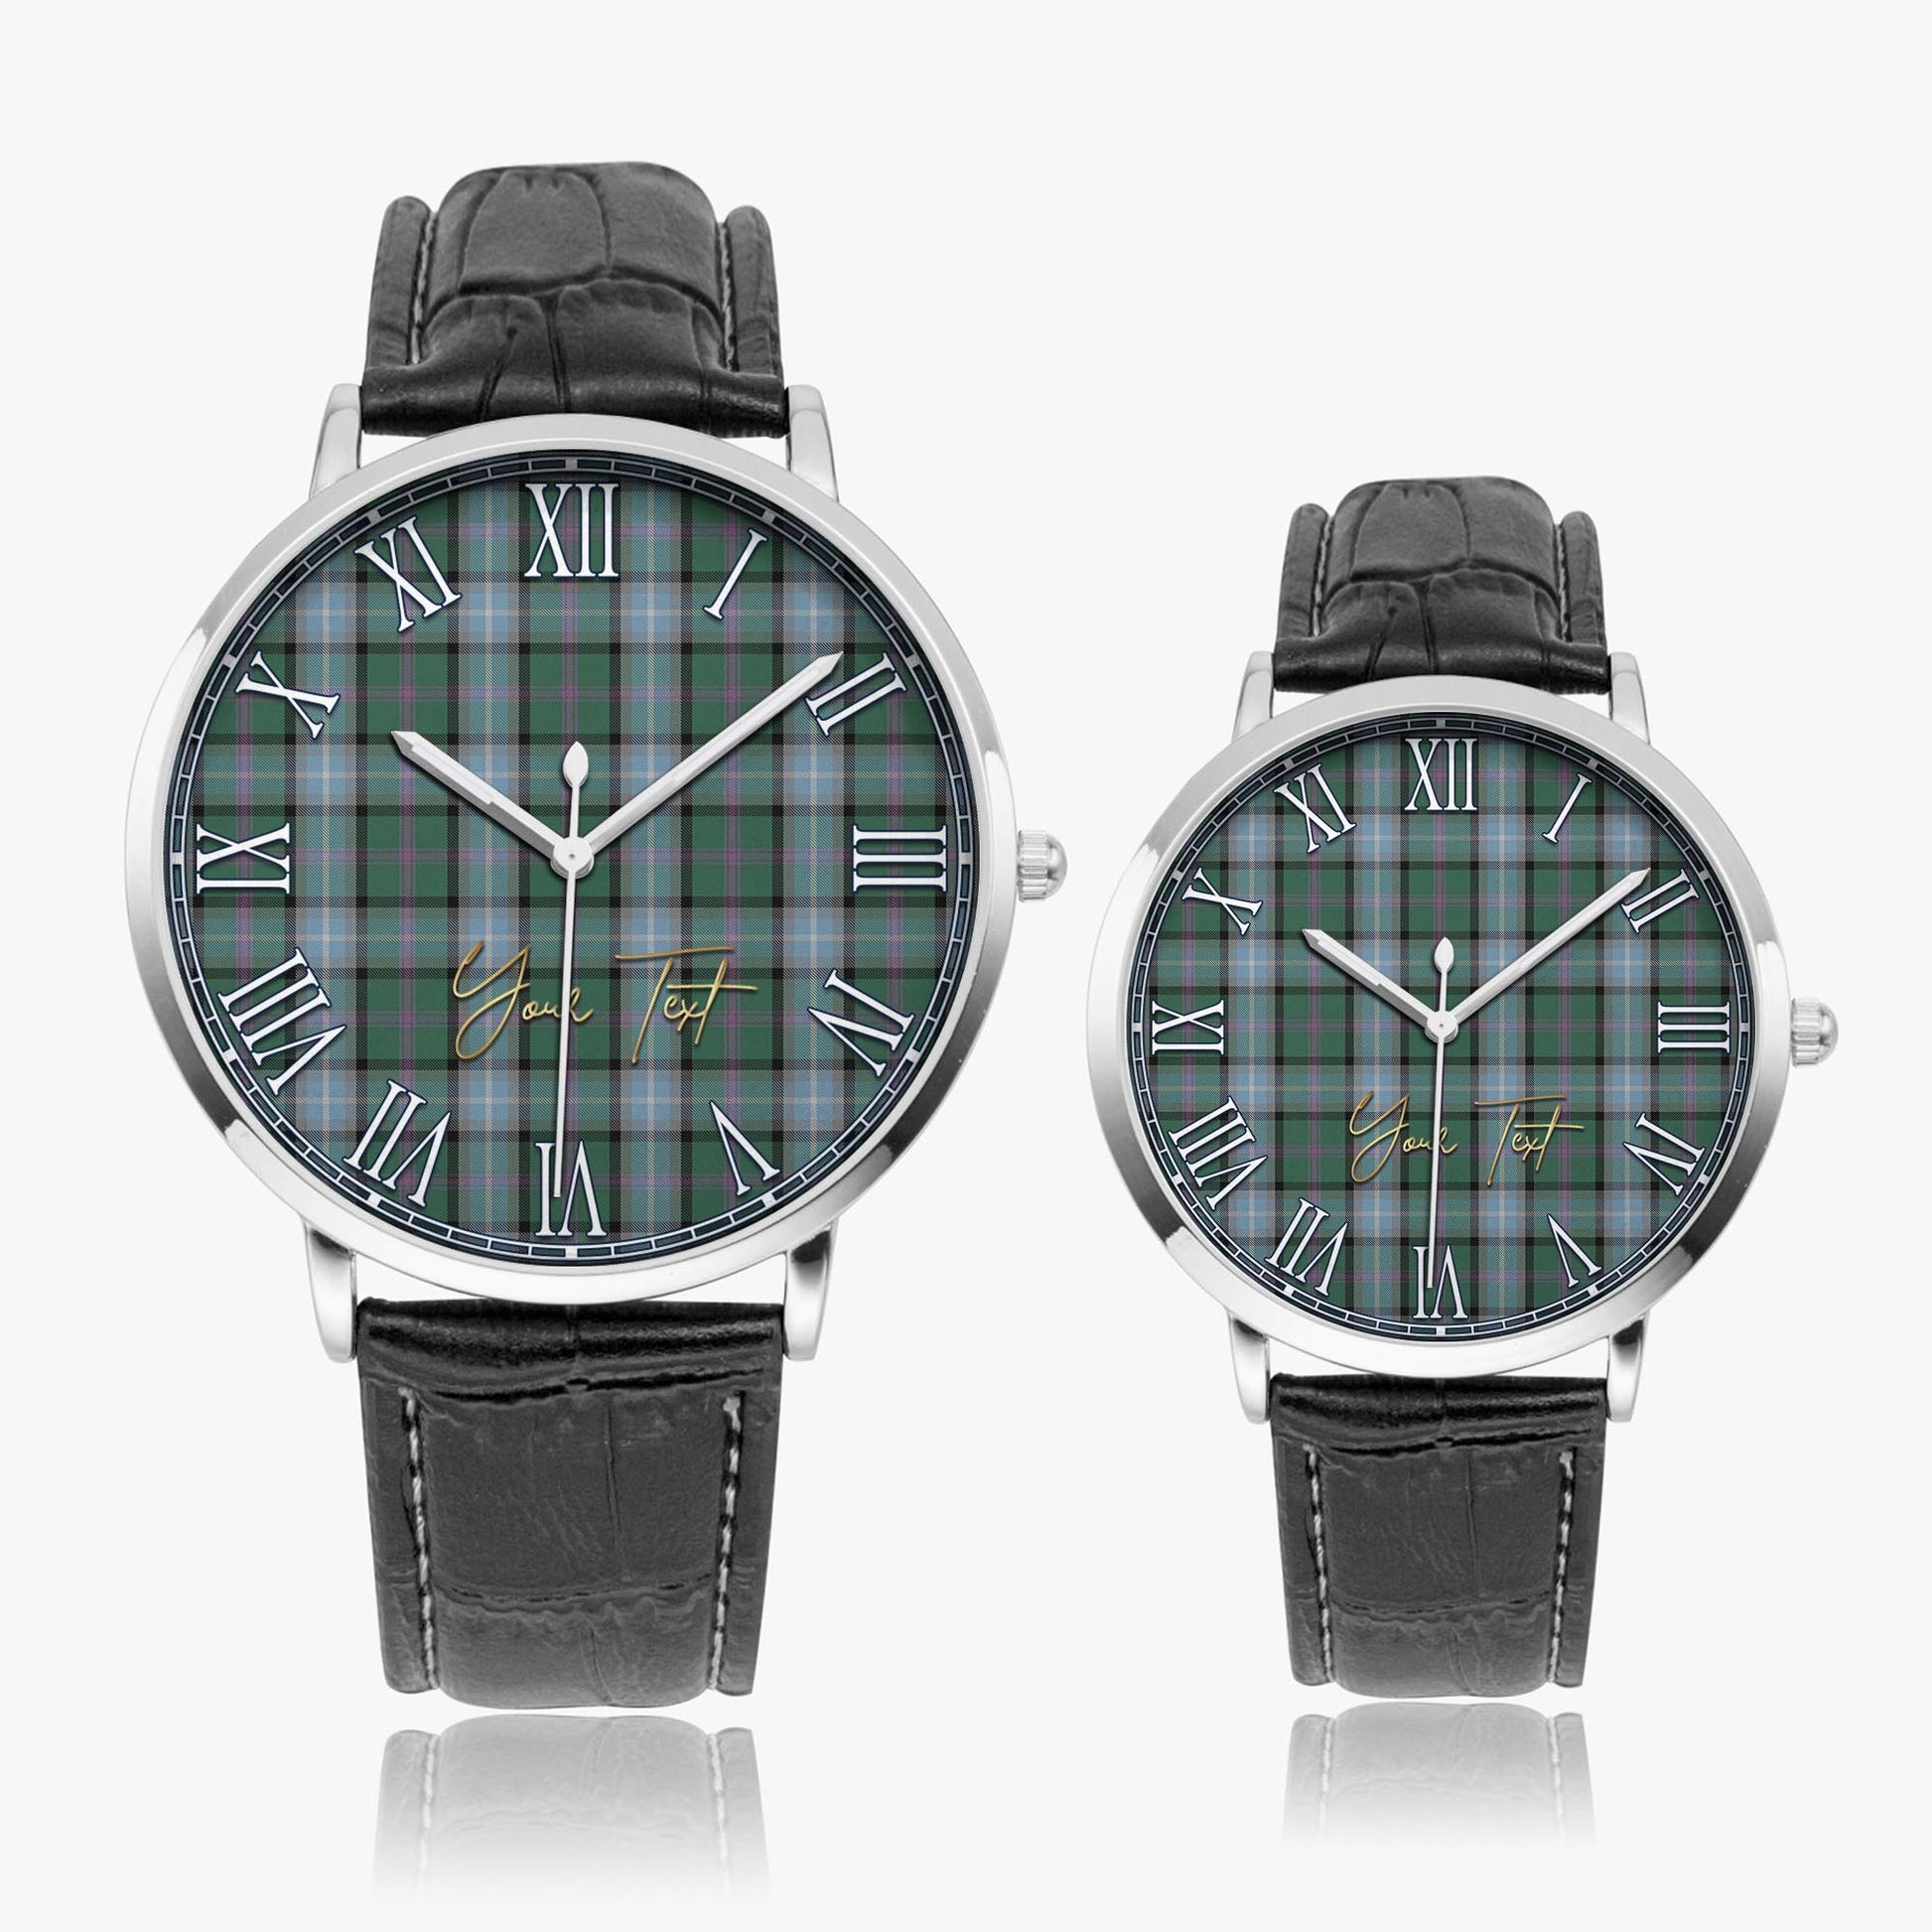 Alexander of Menstry Hunting Tartan Personalized Your Text Leather Trap Quartz Watch Ultra Thin Silver Case With Black Leather Strap - Tartanvibesclothing